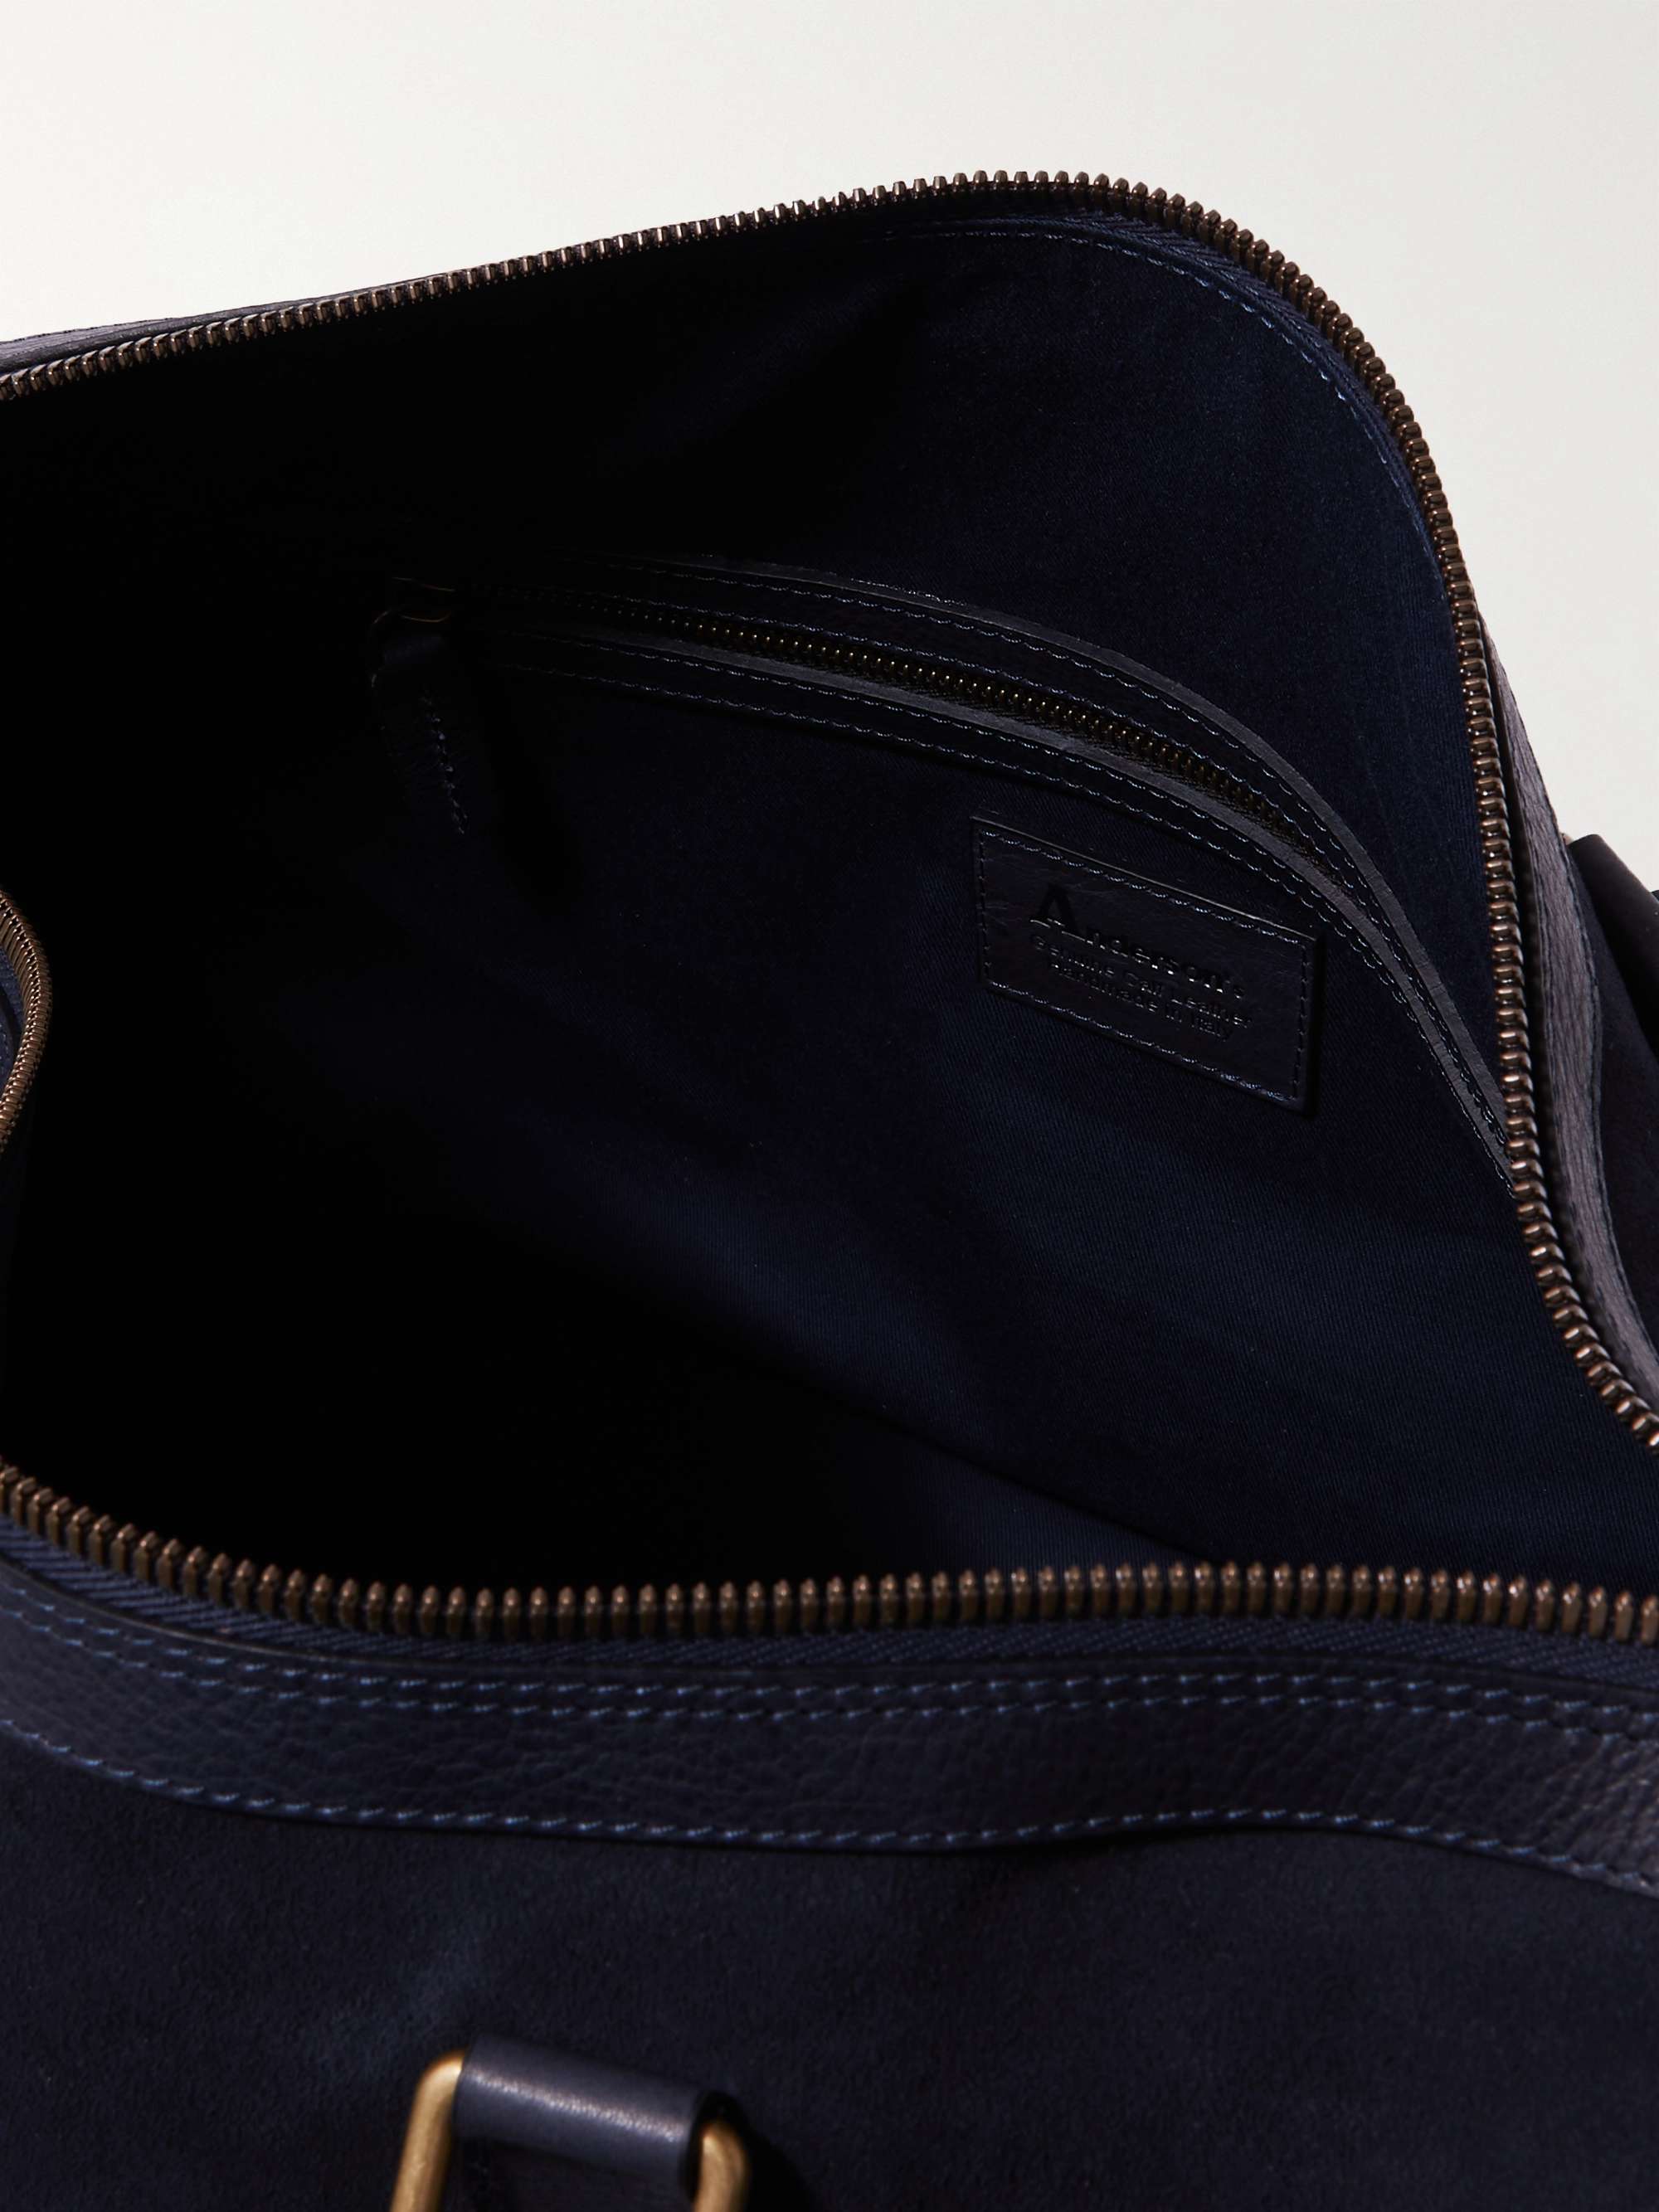 ANDERSON'S Leather-Trimmed Suede Duffle Bag